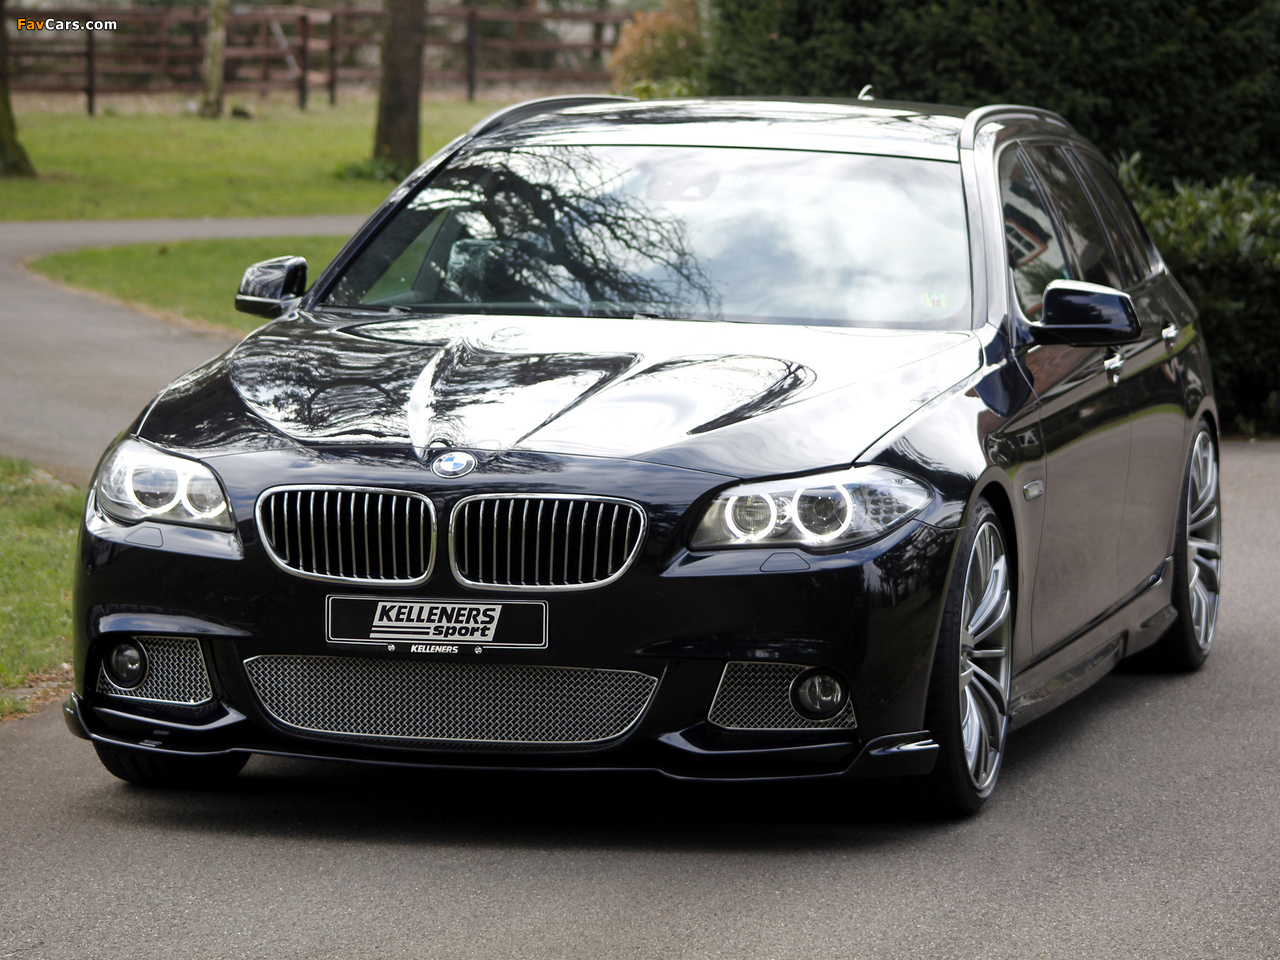 Kelleners Sport BMW 5 Series Touring (F11) 2012 images (1280 x 960)